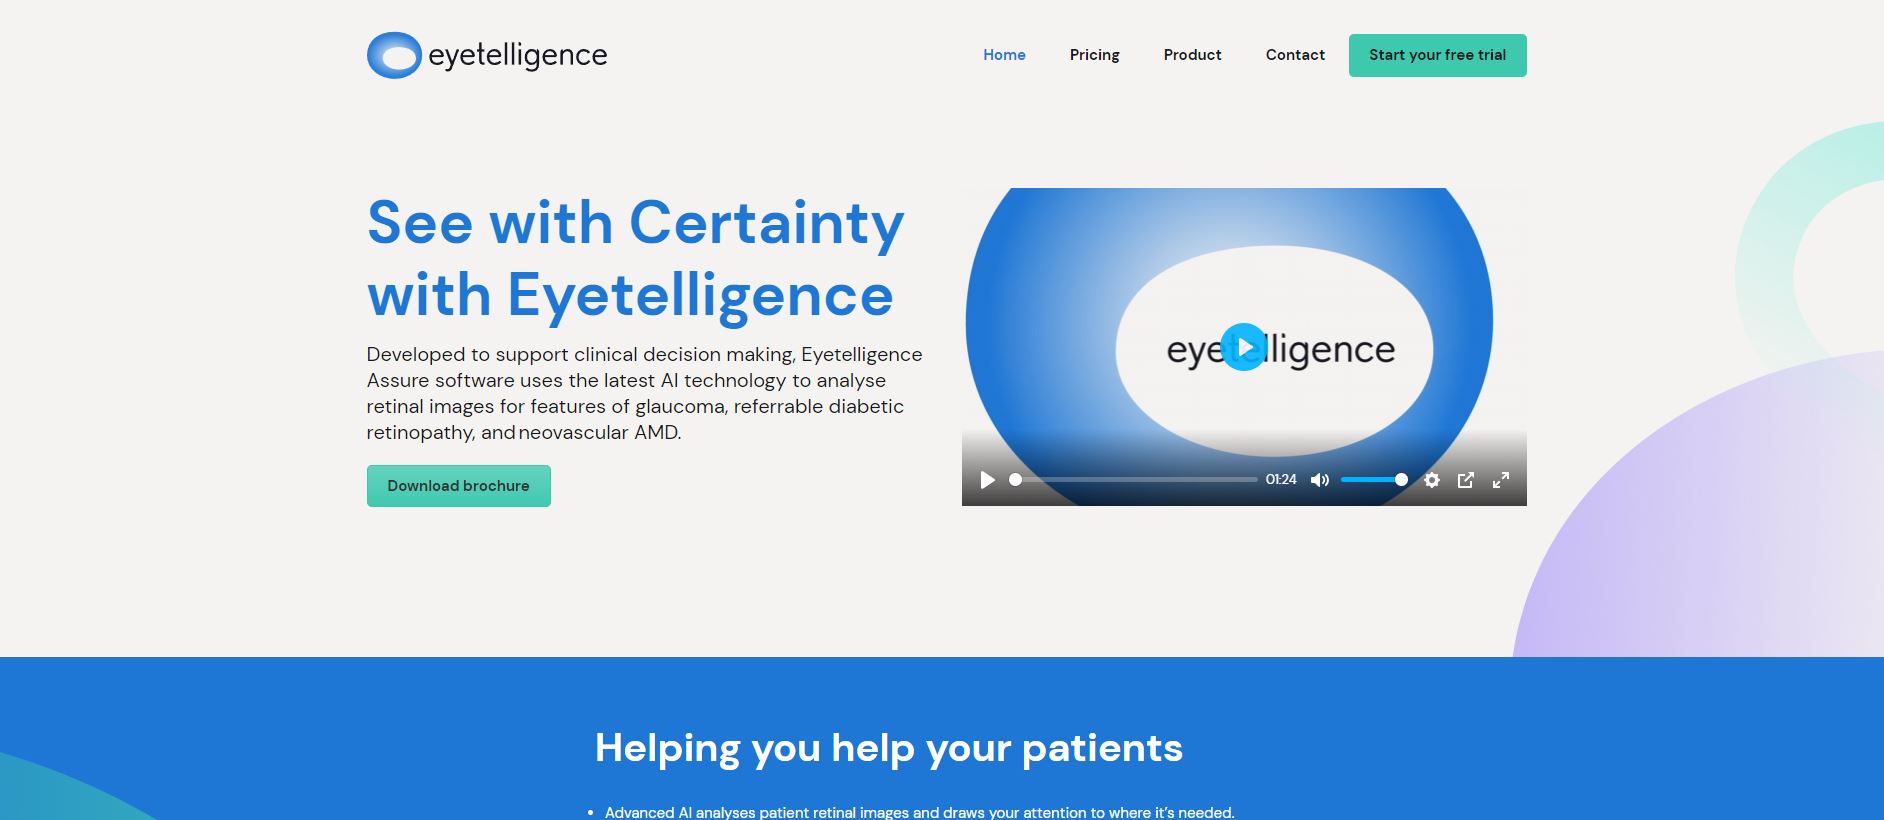 Eyetelligence Ltd, the groundbreaking startup based in Melbourne, that has recently raised an impressive $12M in funding